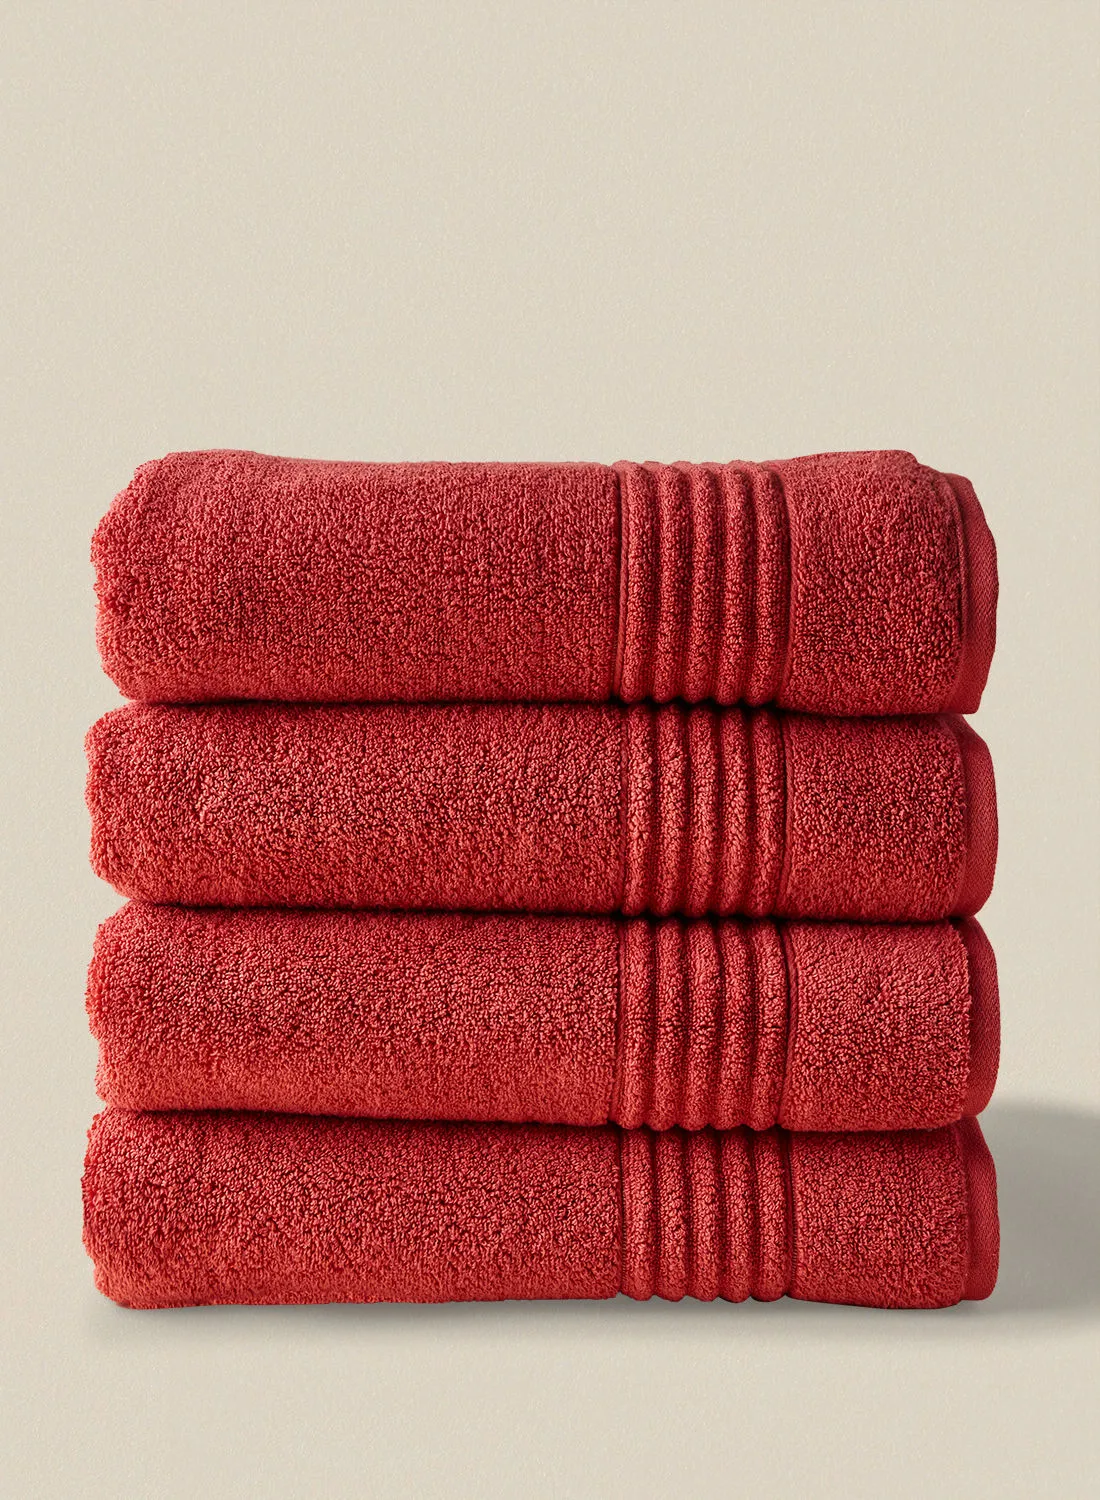 noon east 4 Piece Bathroom Towel Set - 500 GSM 100% Cotton - 4 Bath Towel - Spice Red Color - Highly Absorbent - Fast Dry